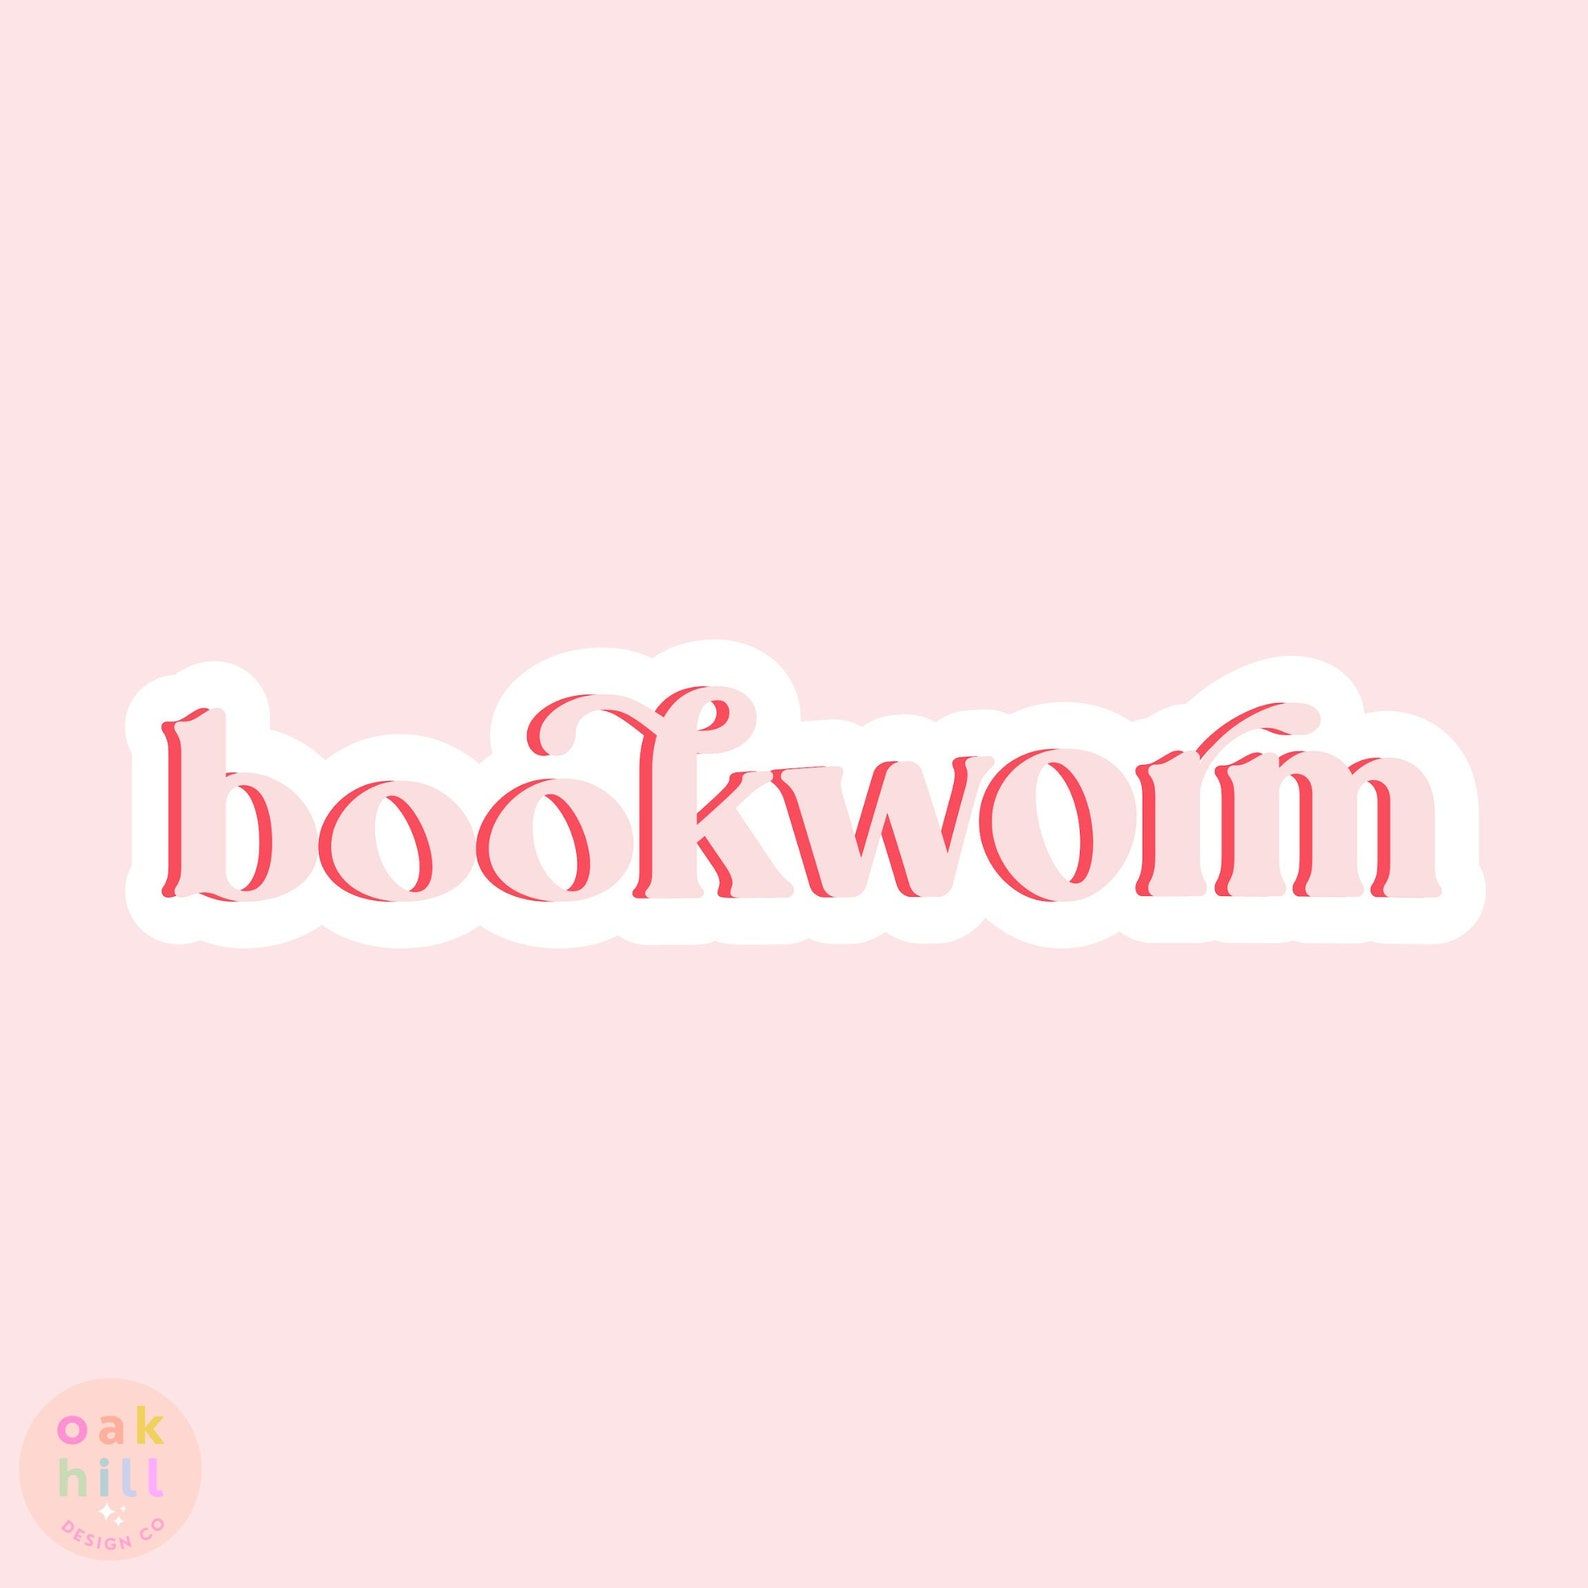 A pink sticker on a pink background that reads "bookworm."